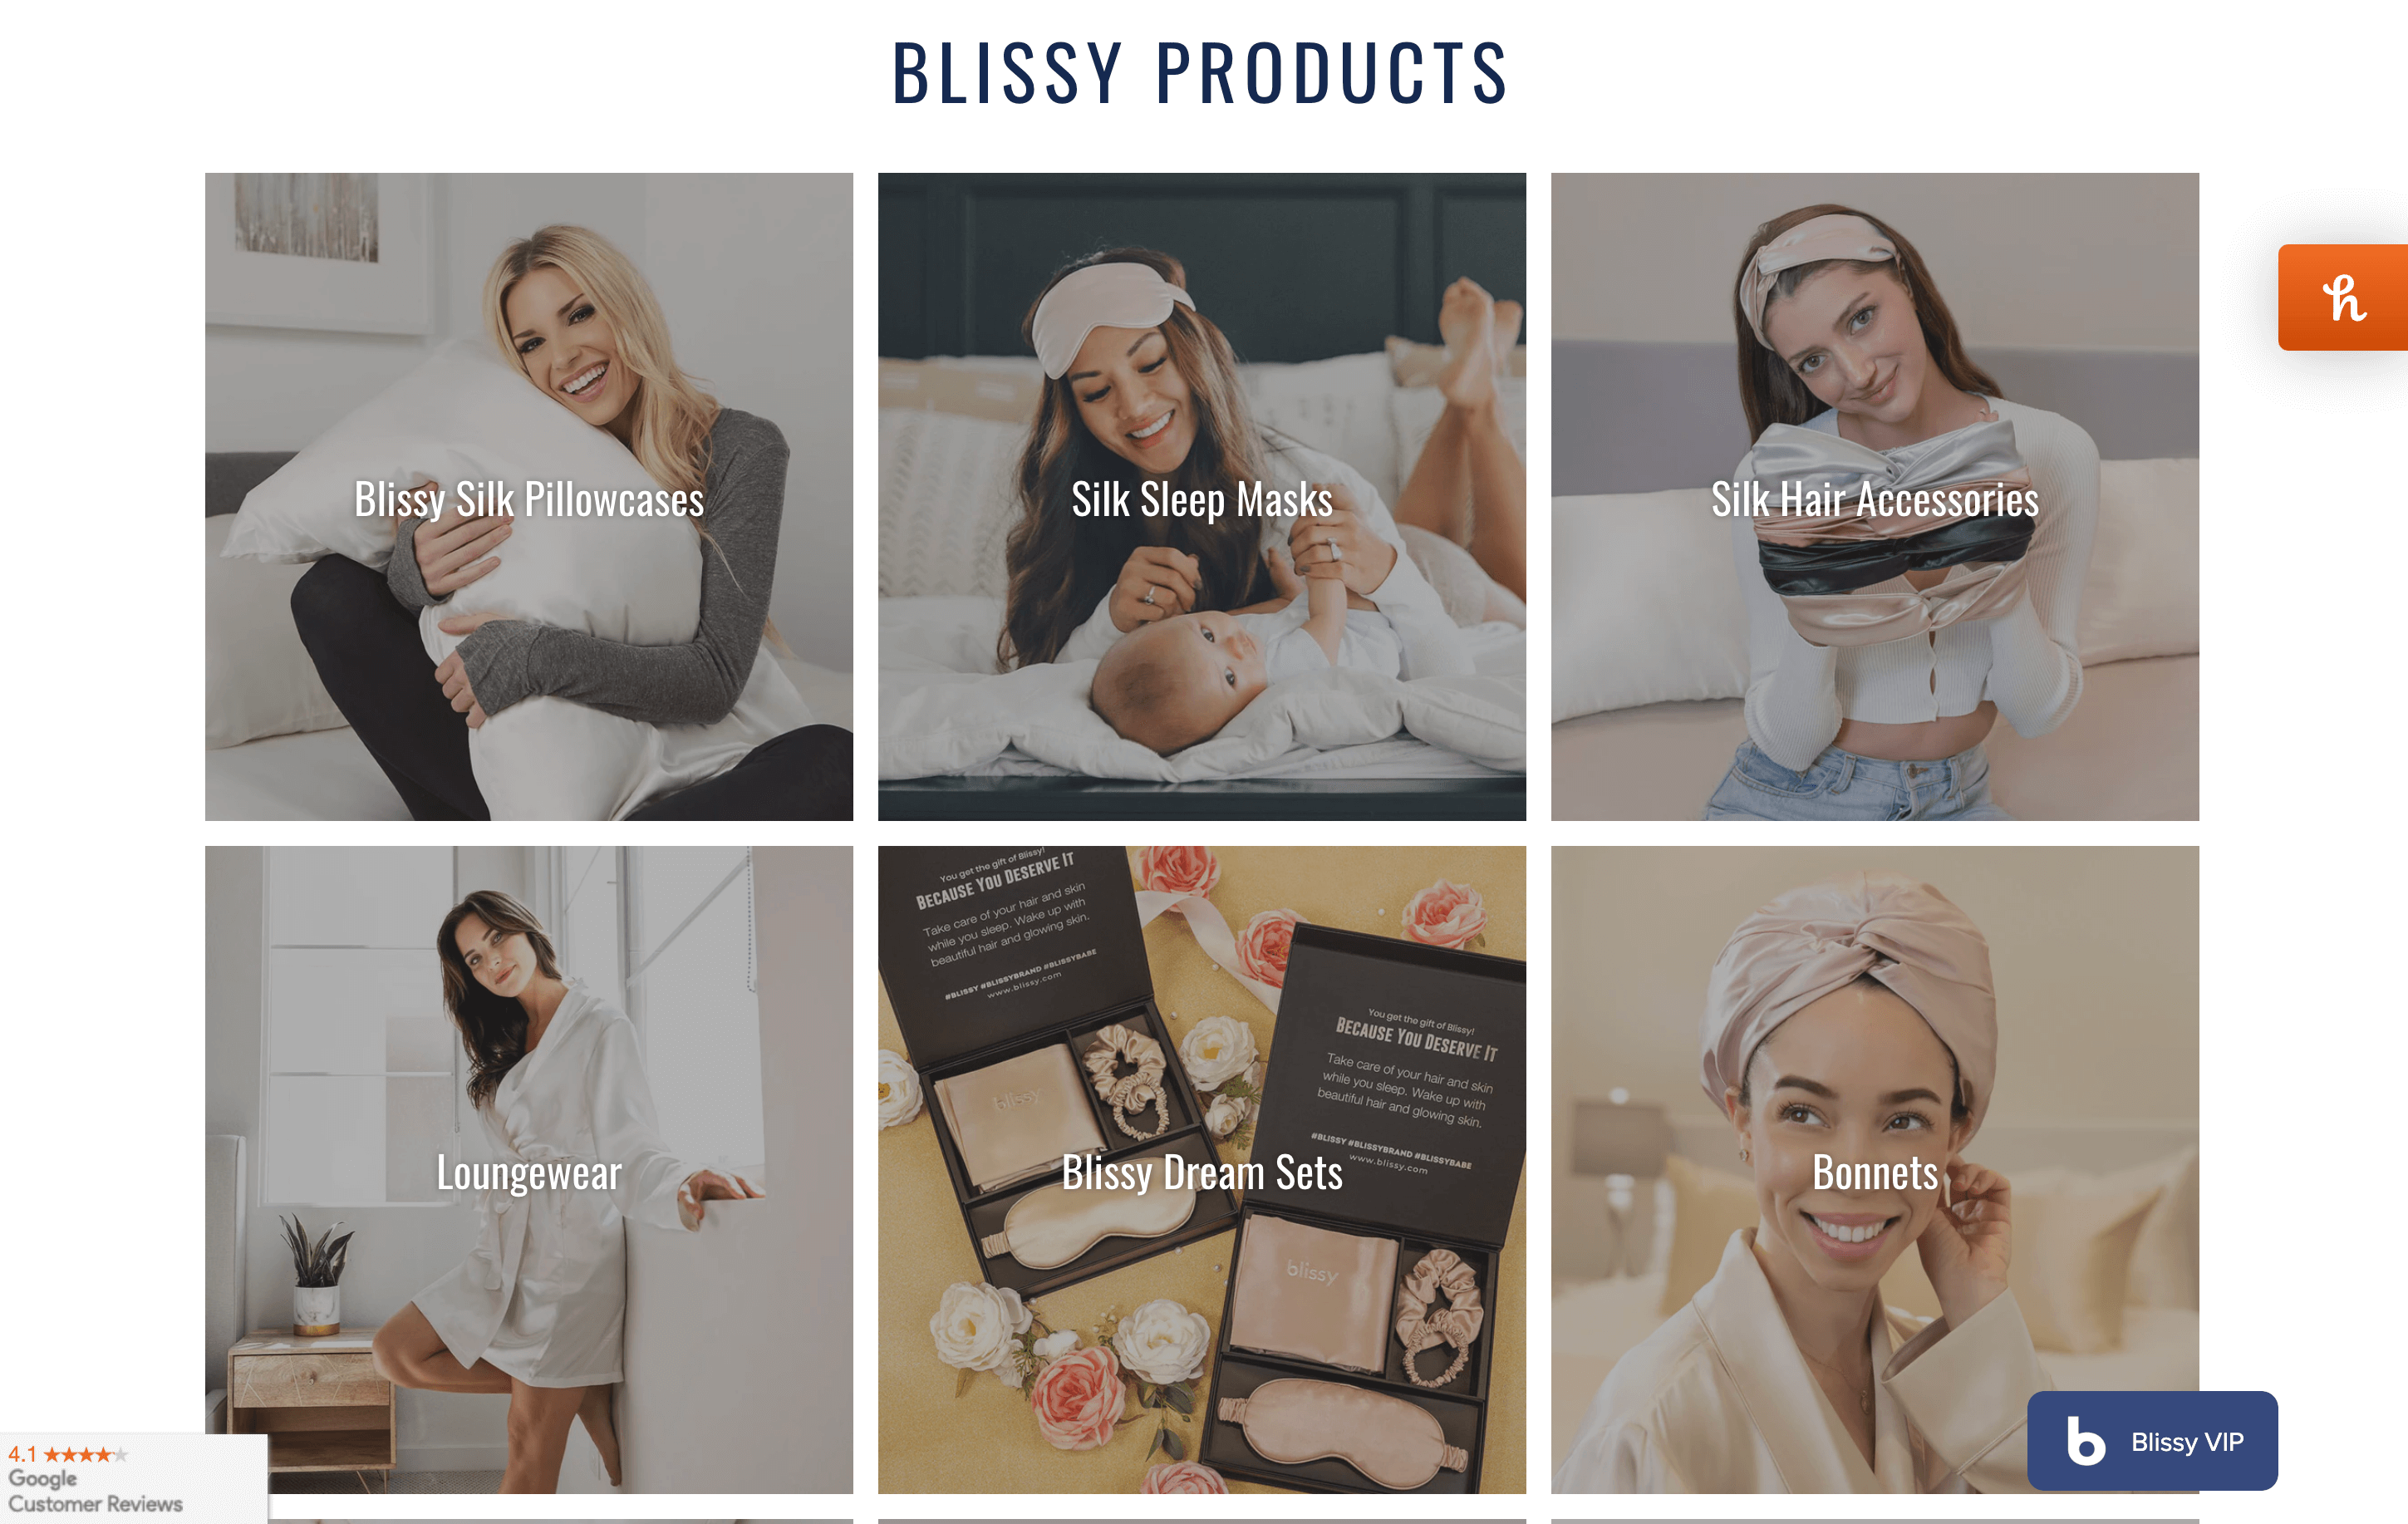 Mental Wellness Brands for World Mental Health Day–A screenshot of Blissy’s homepage. It shows 6 of its product categories with images of each: Blissy silk pillowcases, silk sleep masks, silk hair accessories, loungewear, Blissy dream sets, and bonnets. 